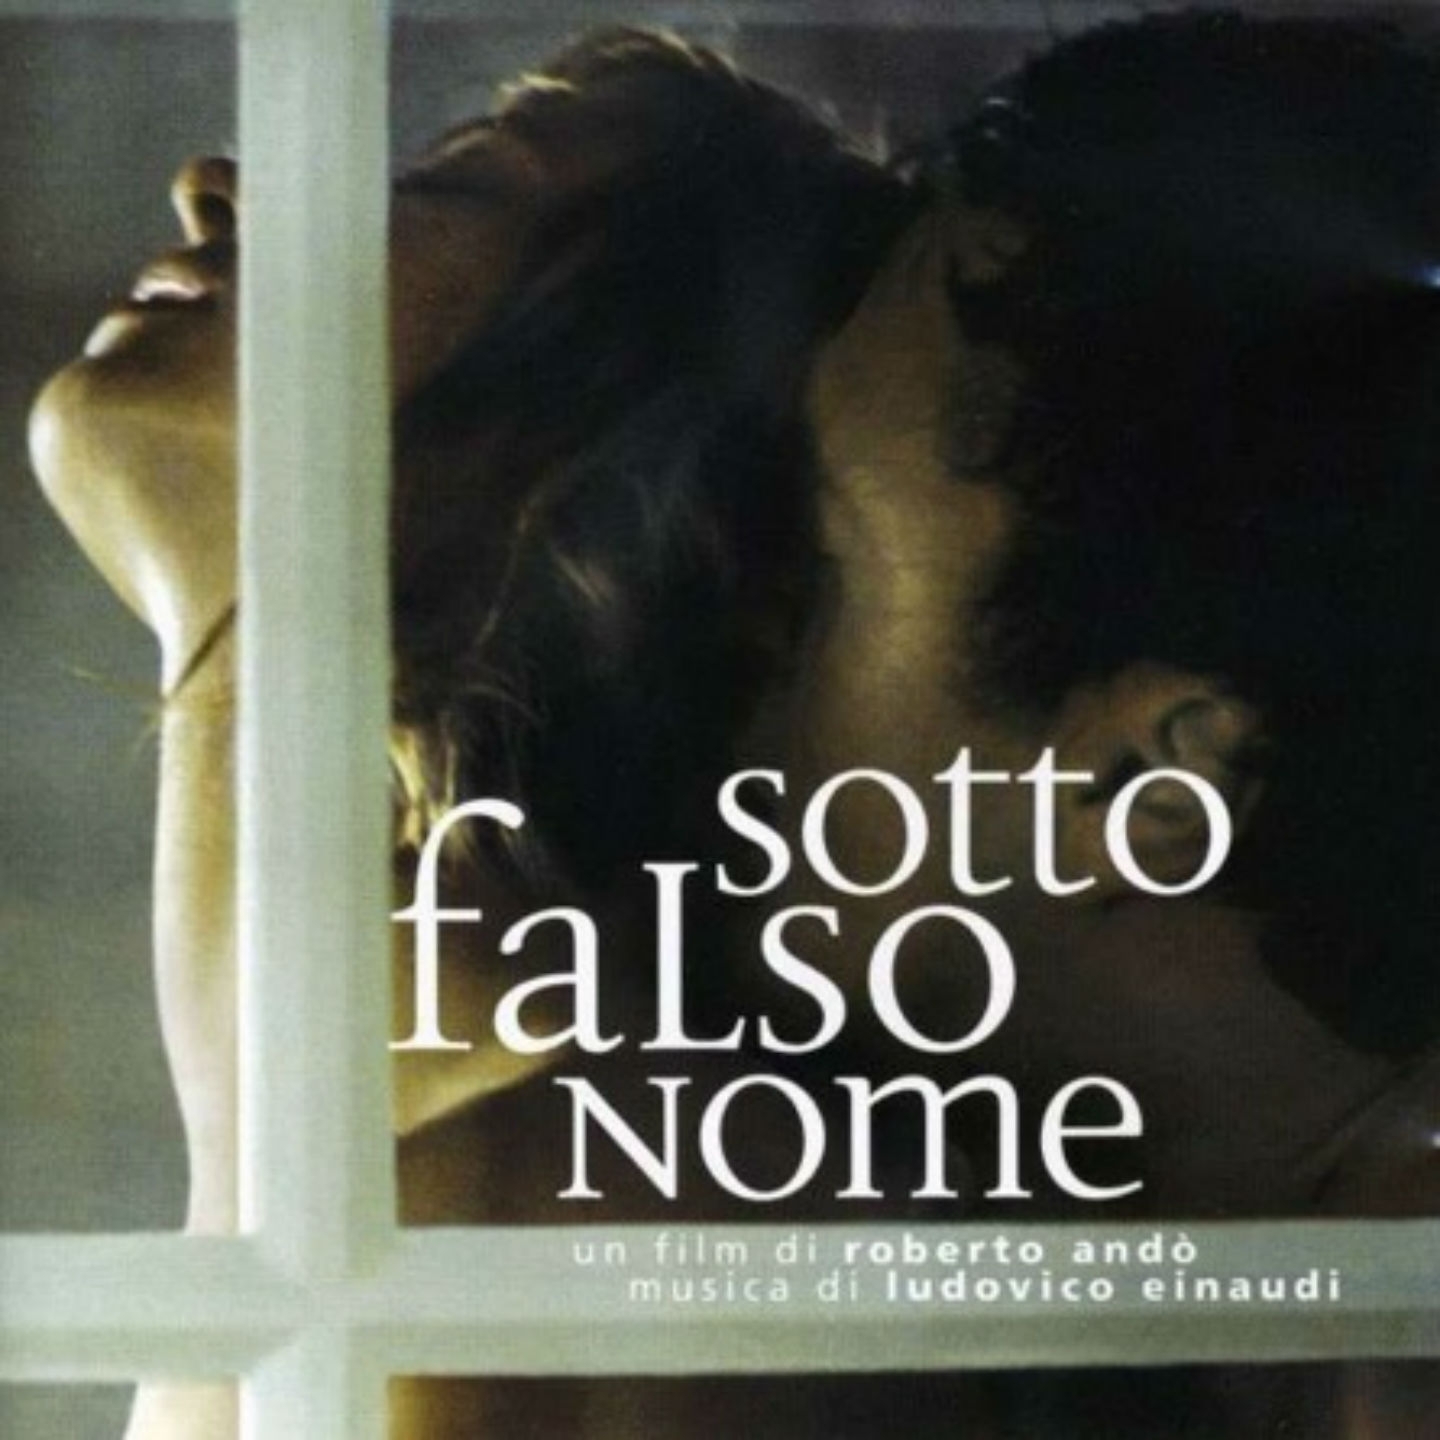 Histoire sans nom (From "Sotto falso nome")